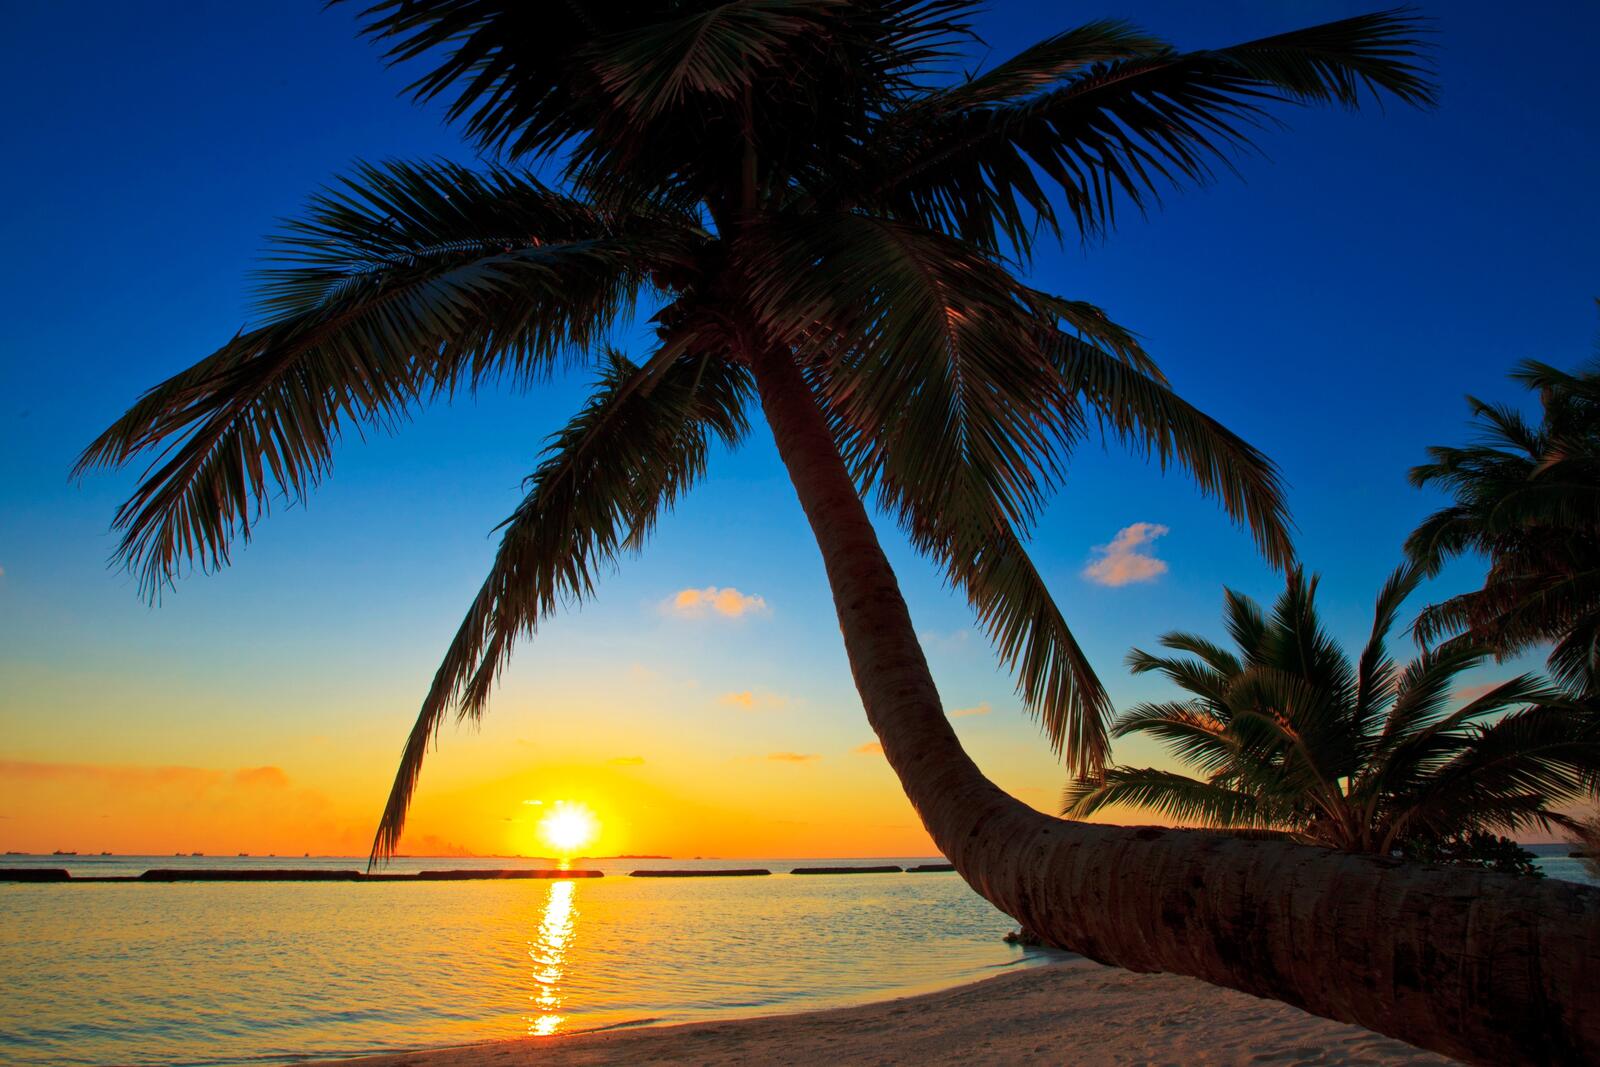 Free photo Wallpaper with a palm tree on the beach at sunset